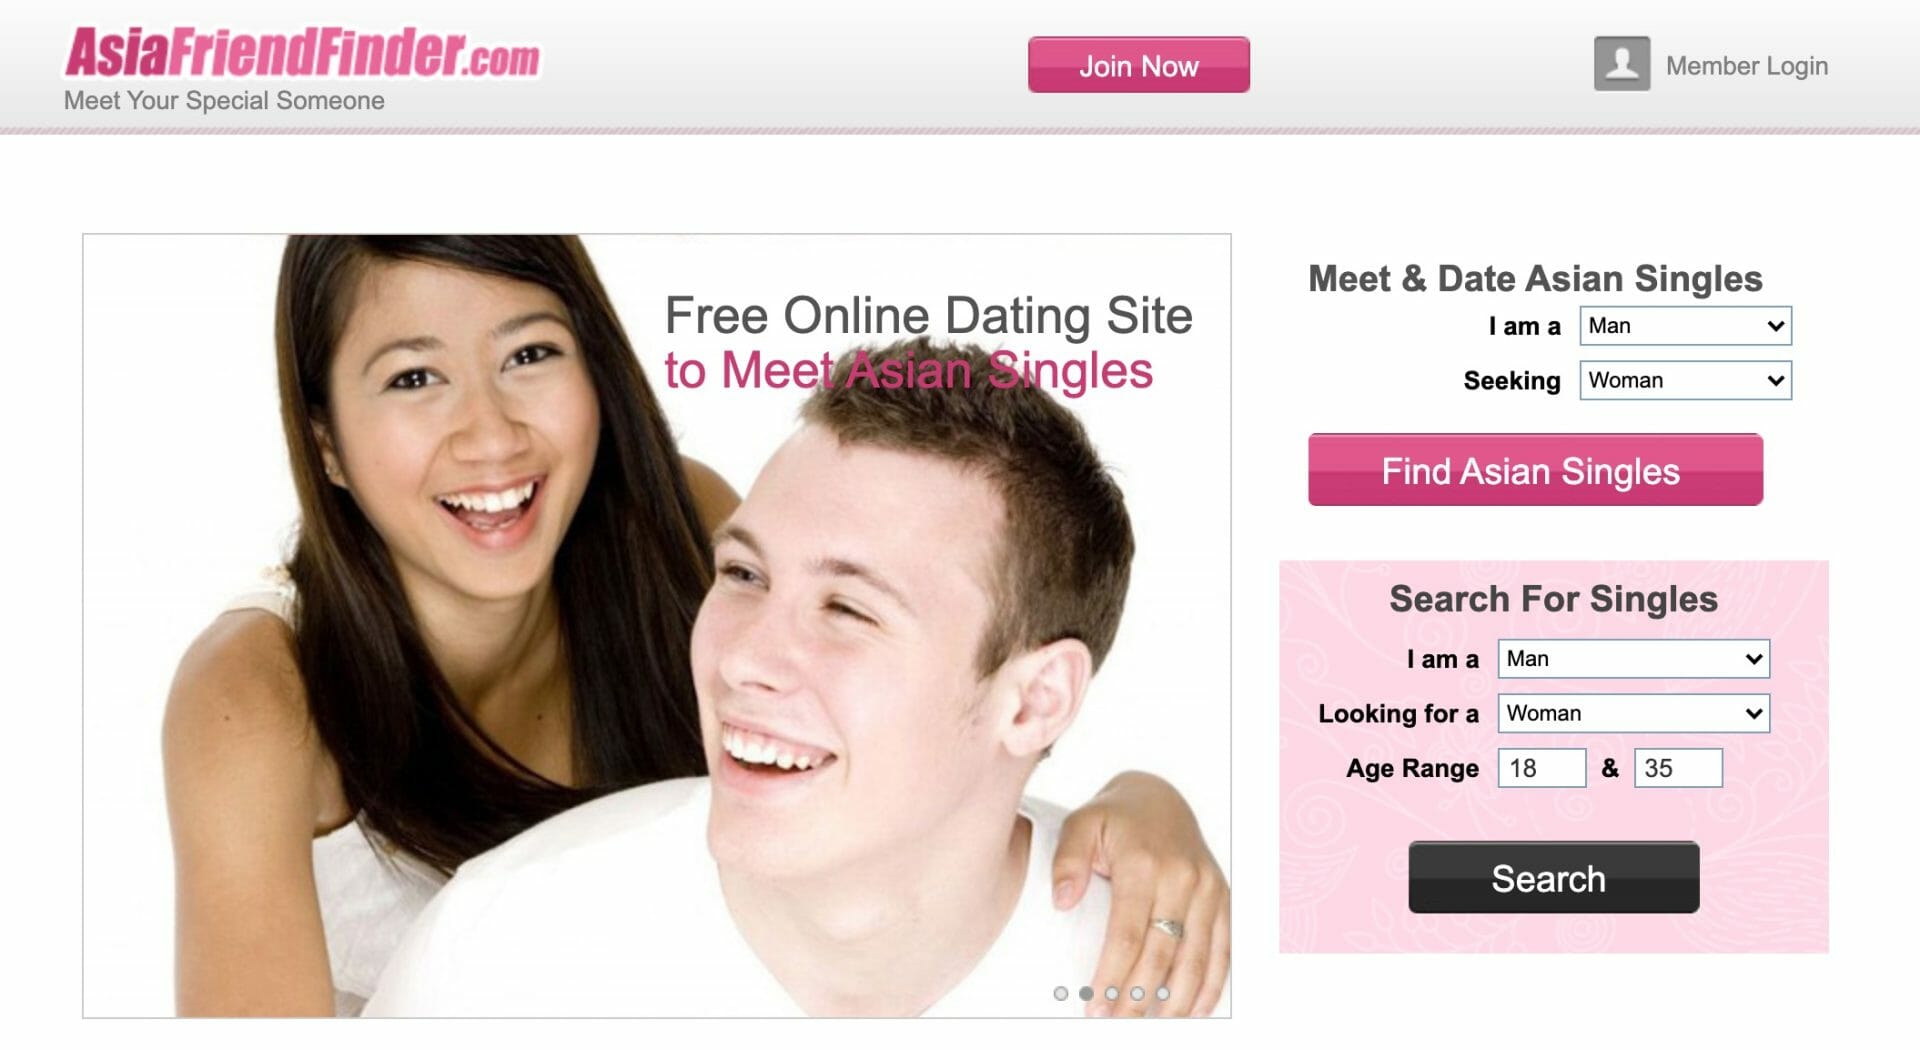 Dating asian singles has never been easier with our free online personal ad...